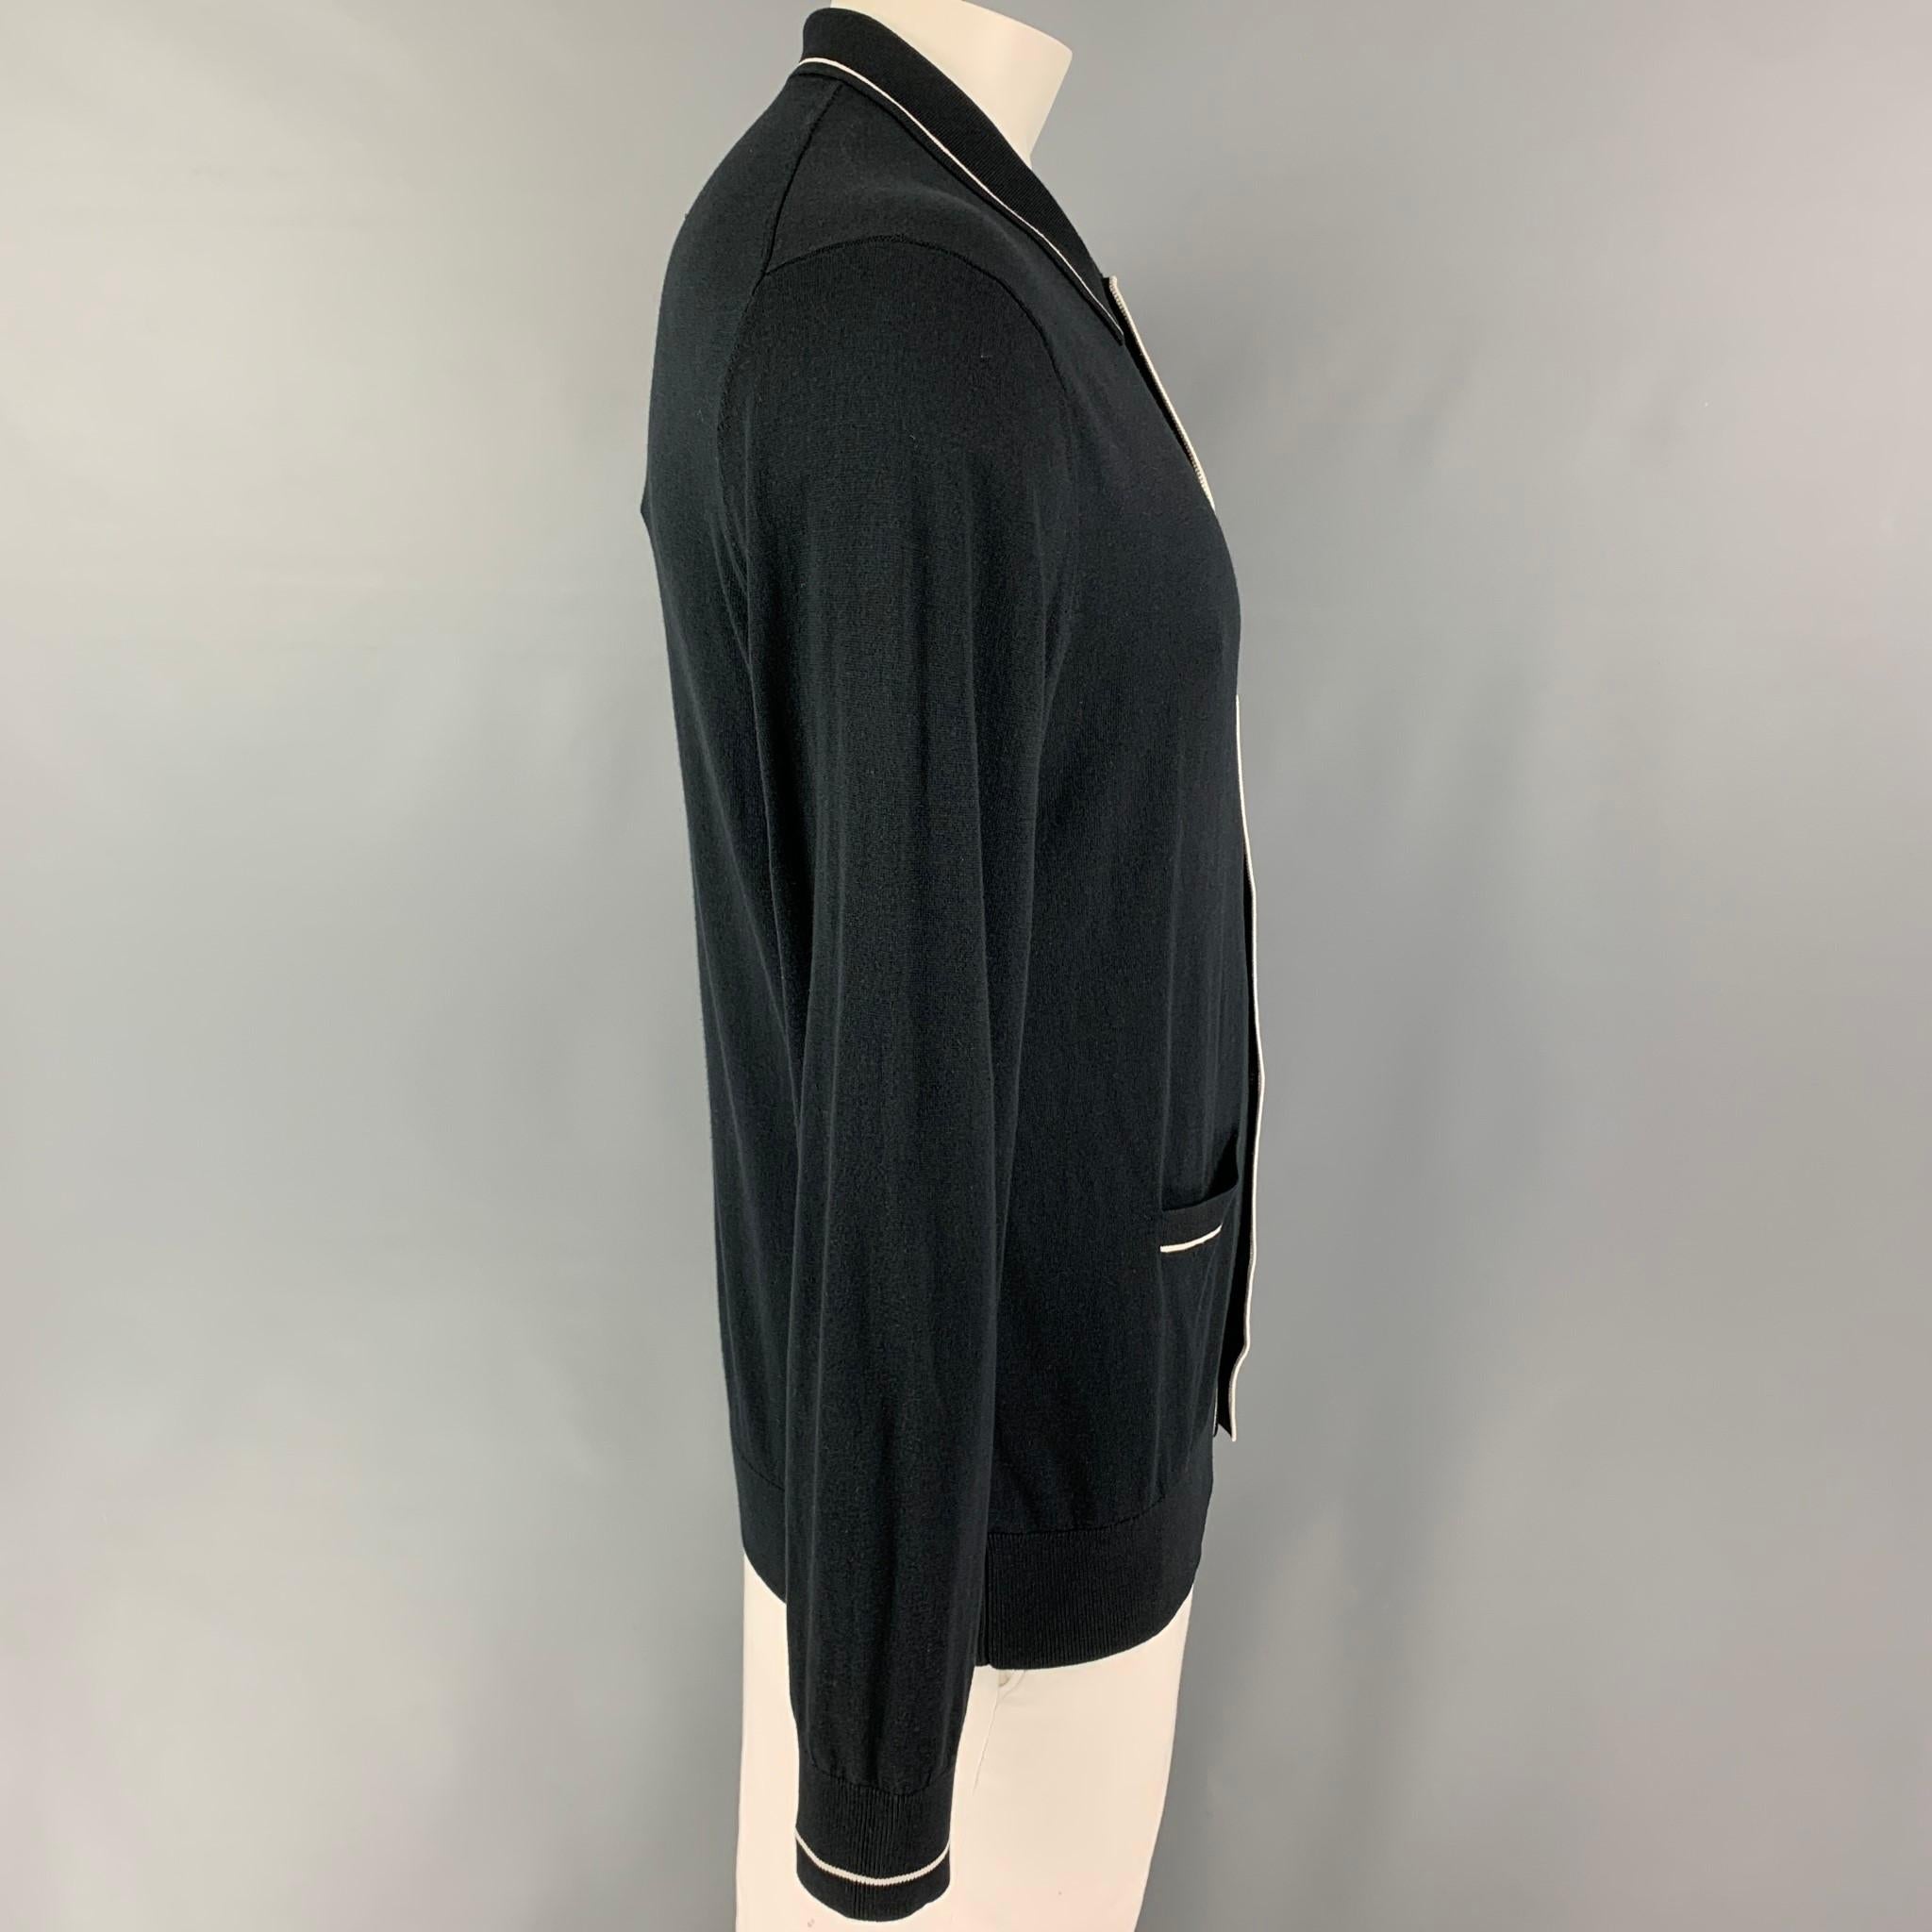 TODD SNYDER cardigan comes in a navy & white silk / cotton featuring a spread collar, front pockets, and a buttoned closure. 

Very Good Pre-Owned Condition.
Marked: L

Measurements:

Shoulder: 19 in.
Chest: 44 in.
Sleeve: 27.5 in.
Length: 28.5 in.